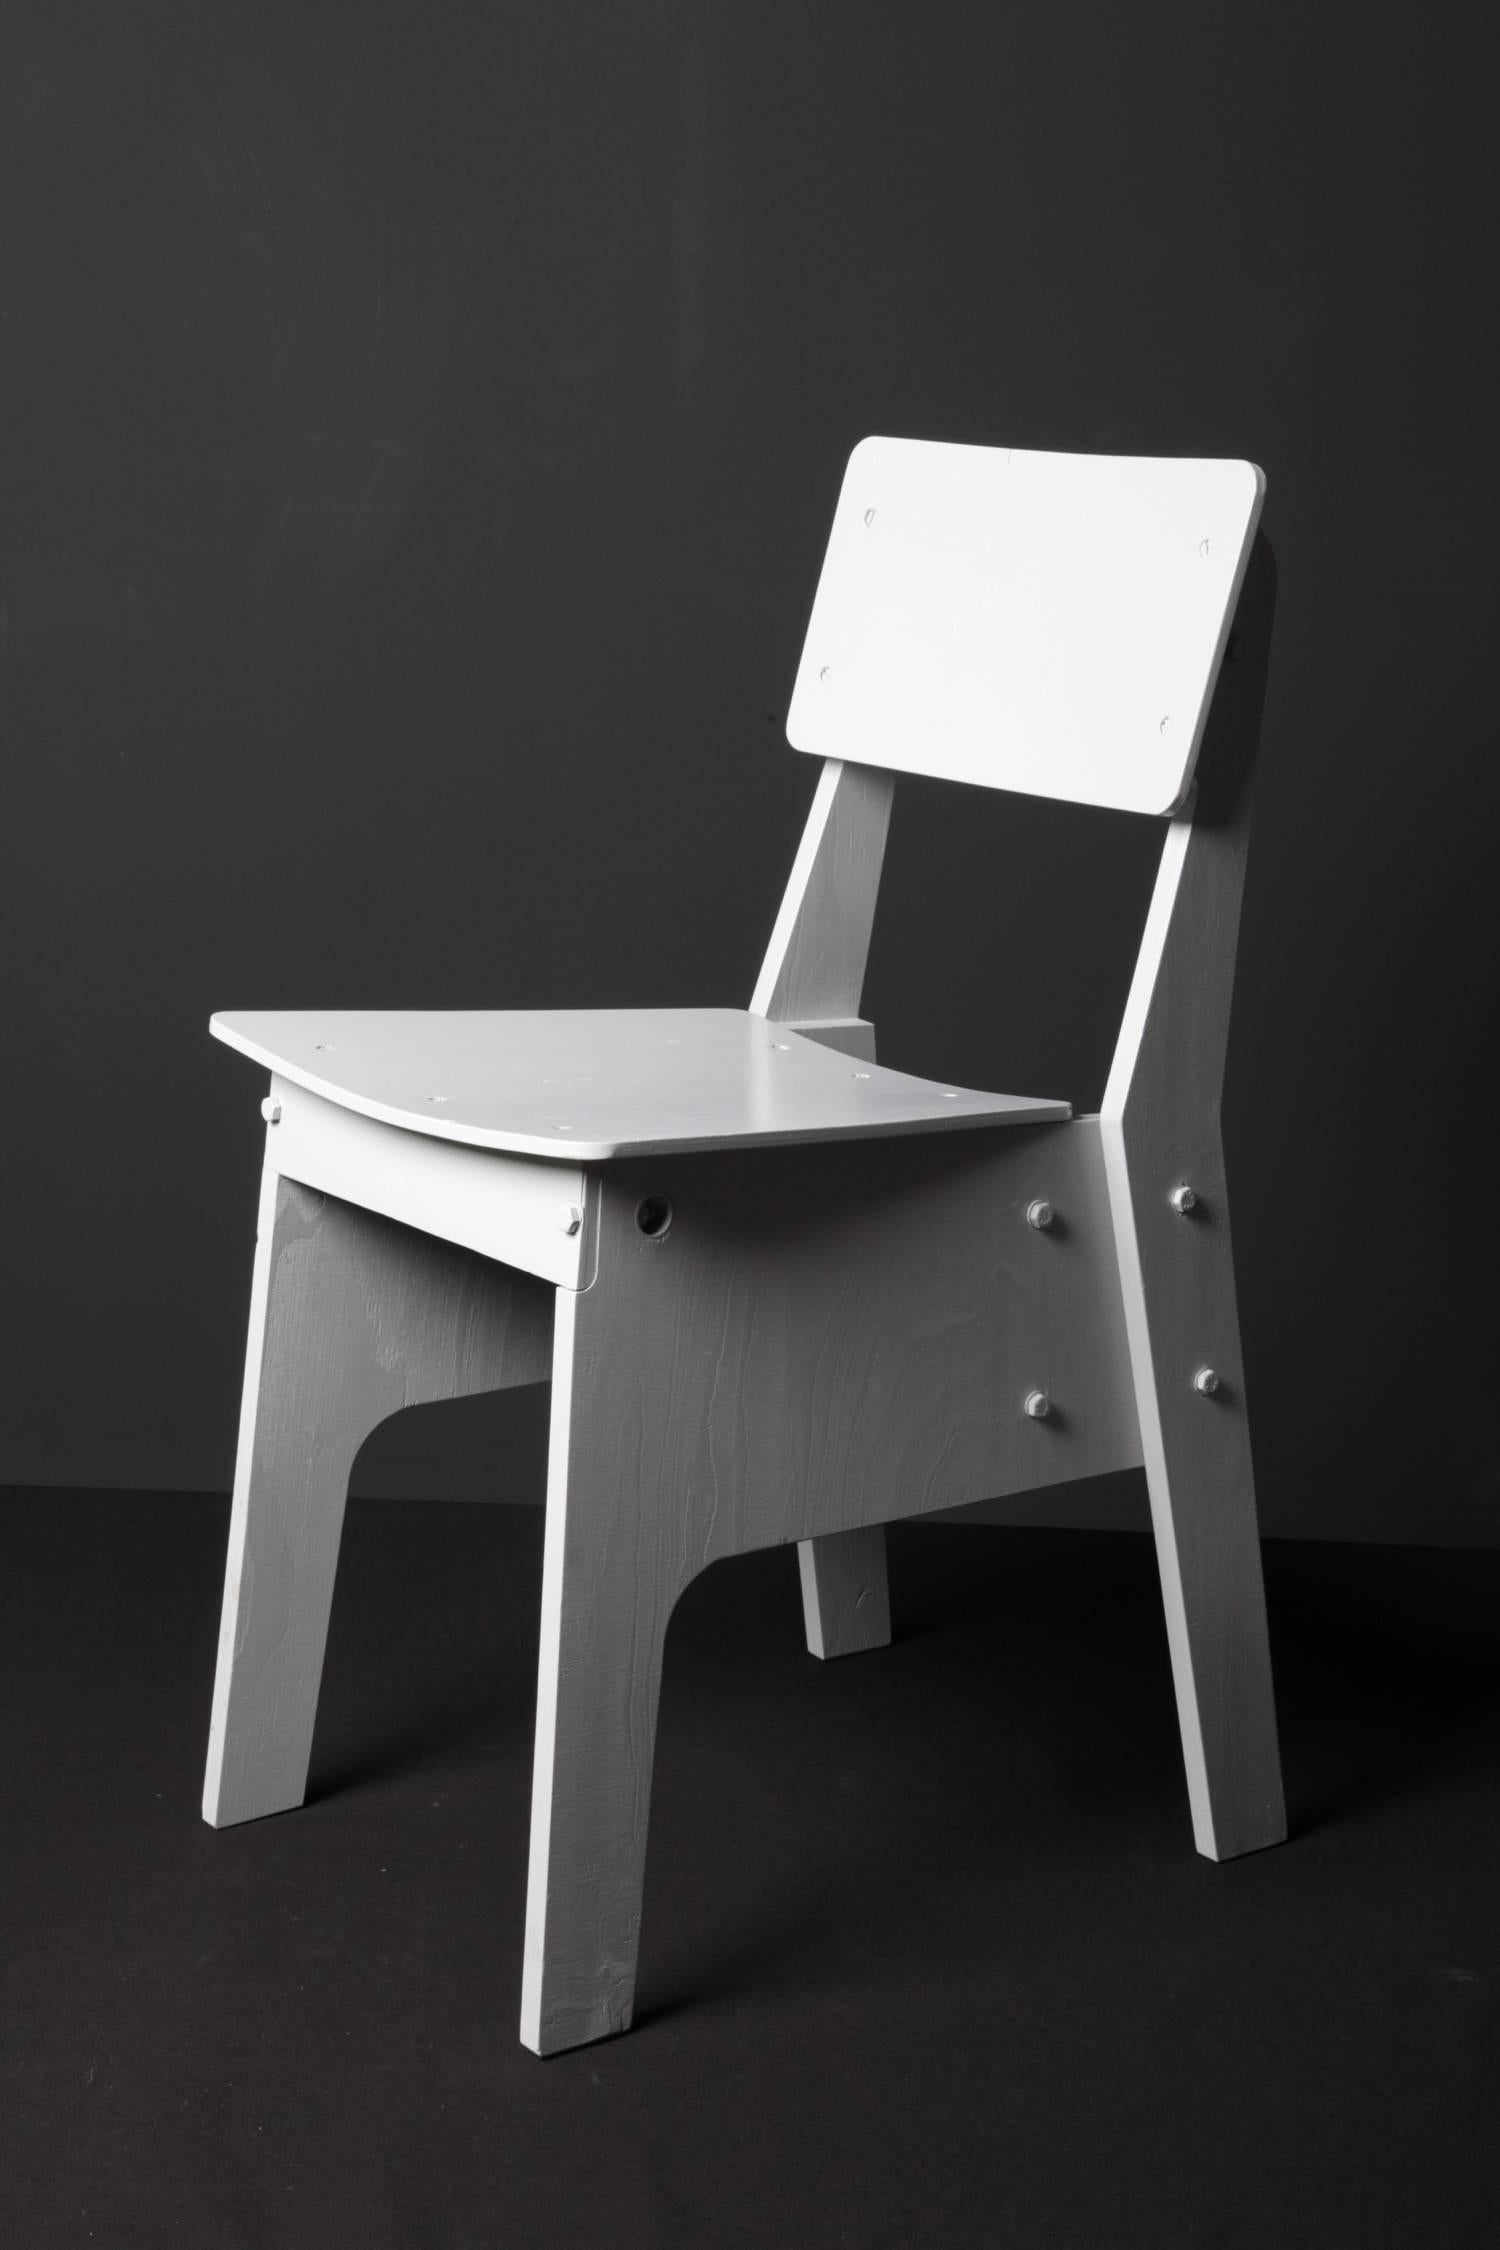 Crisis Chair by Piet Hein Eek in Plywood In Excellent Condition For Sale In Berlin, DE